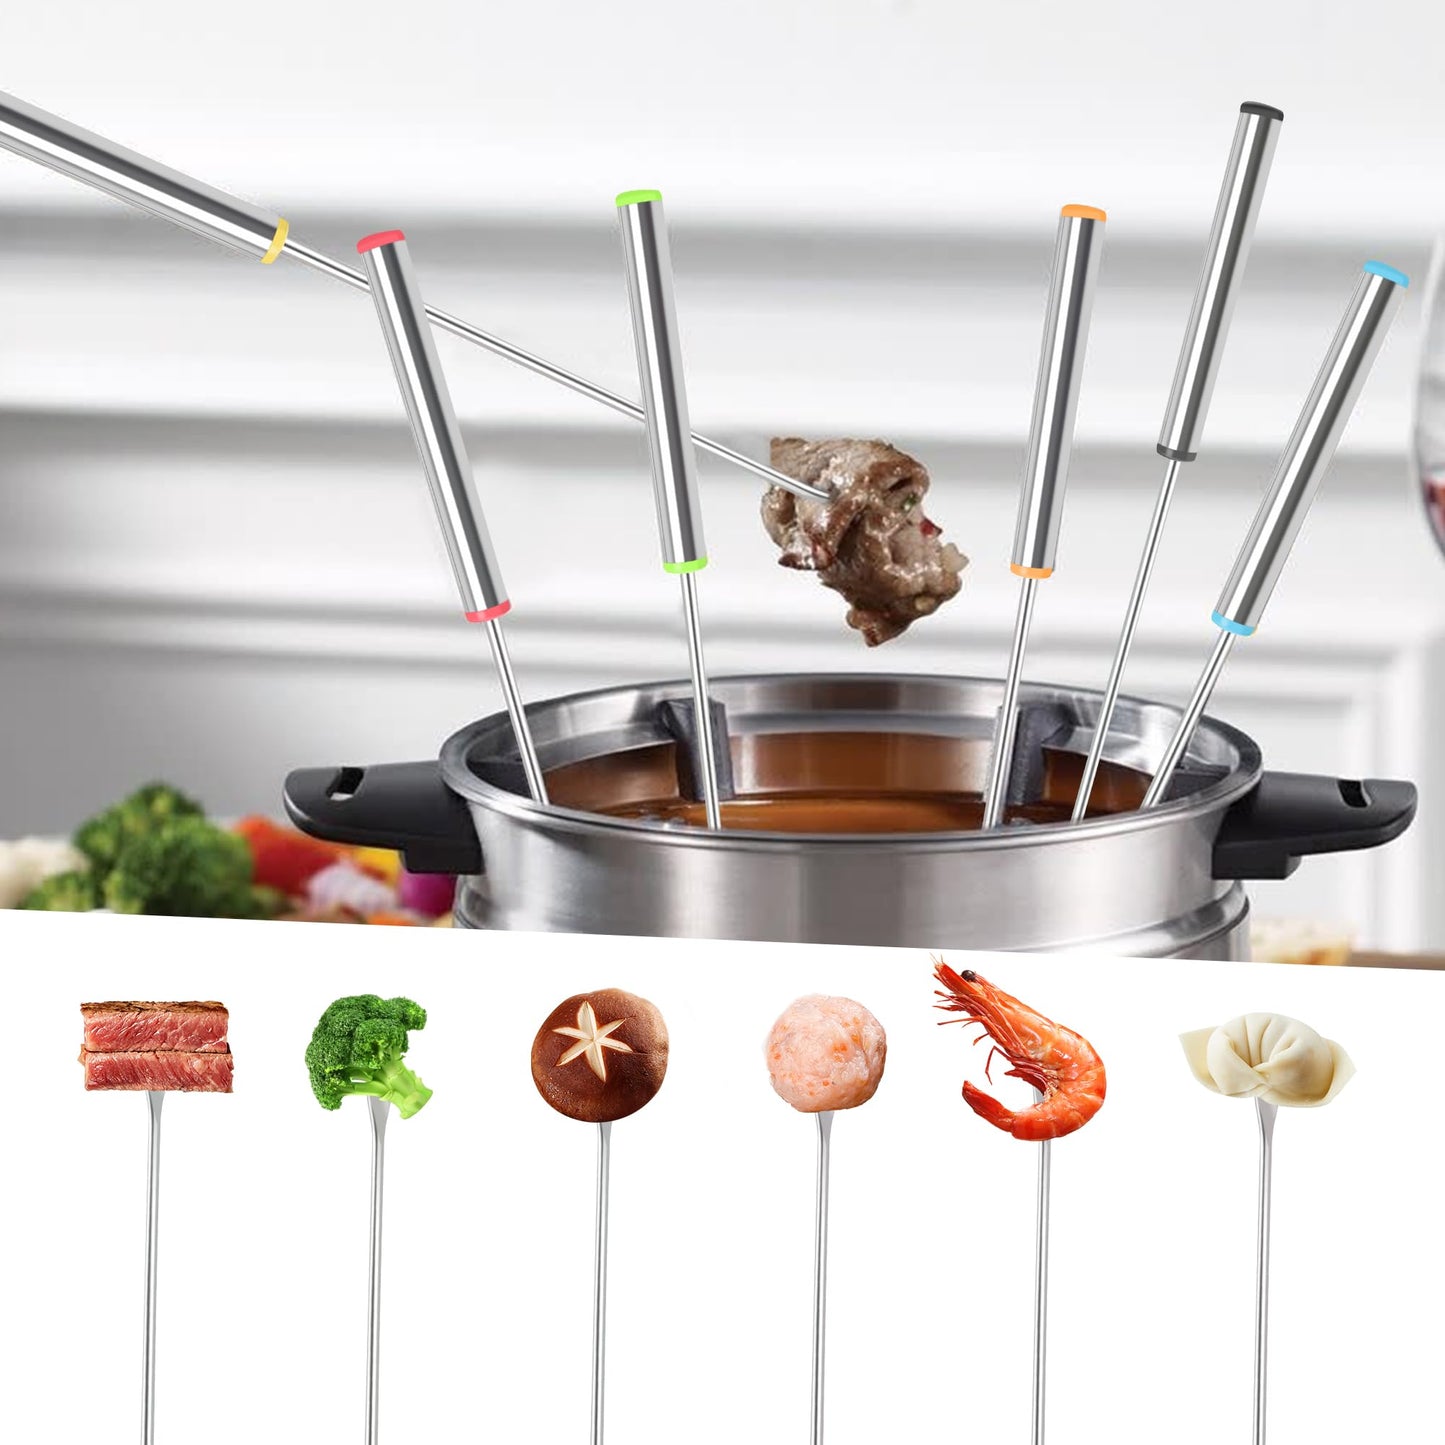 Fondue Forks, 6pcs 9.5 Inch Color-Coded Fondue Forks, Stainless Steel Fondue Sticks Heat Resistant Handle, Dishwasher Safe For Chocolate Fountain, Cheese, Hot Pot, Barbecue, Marshmallows